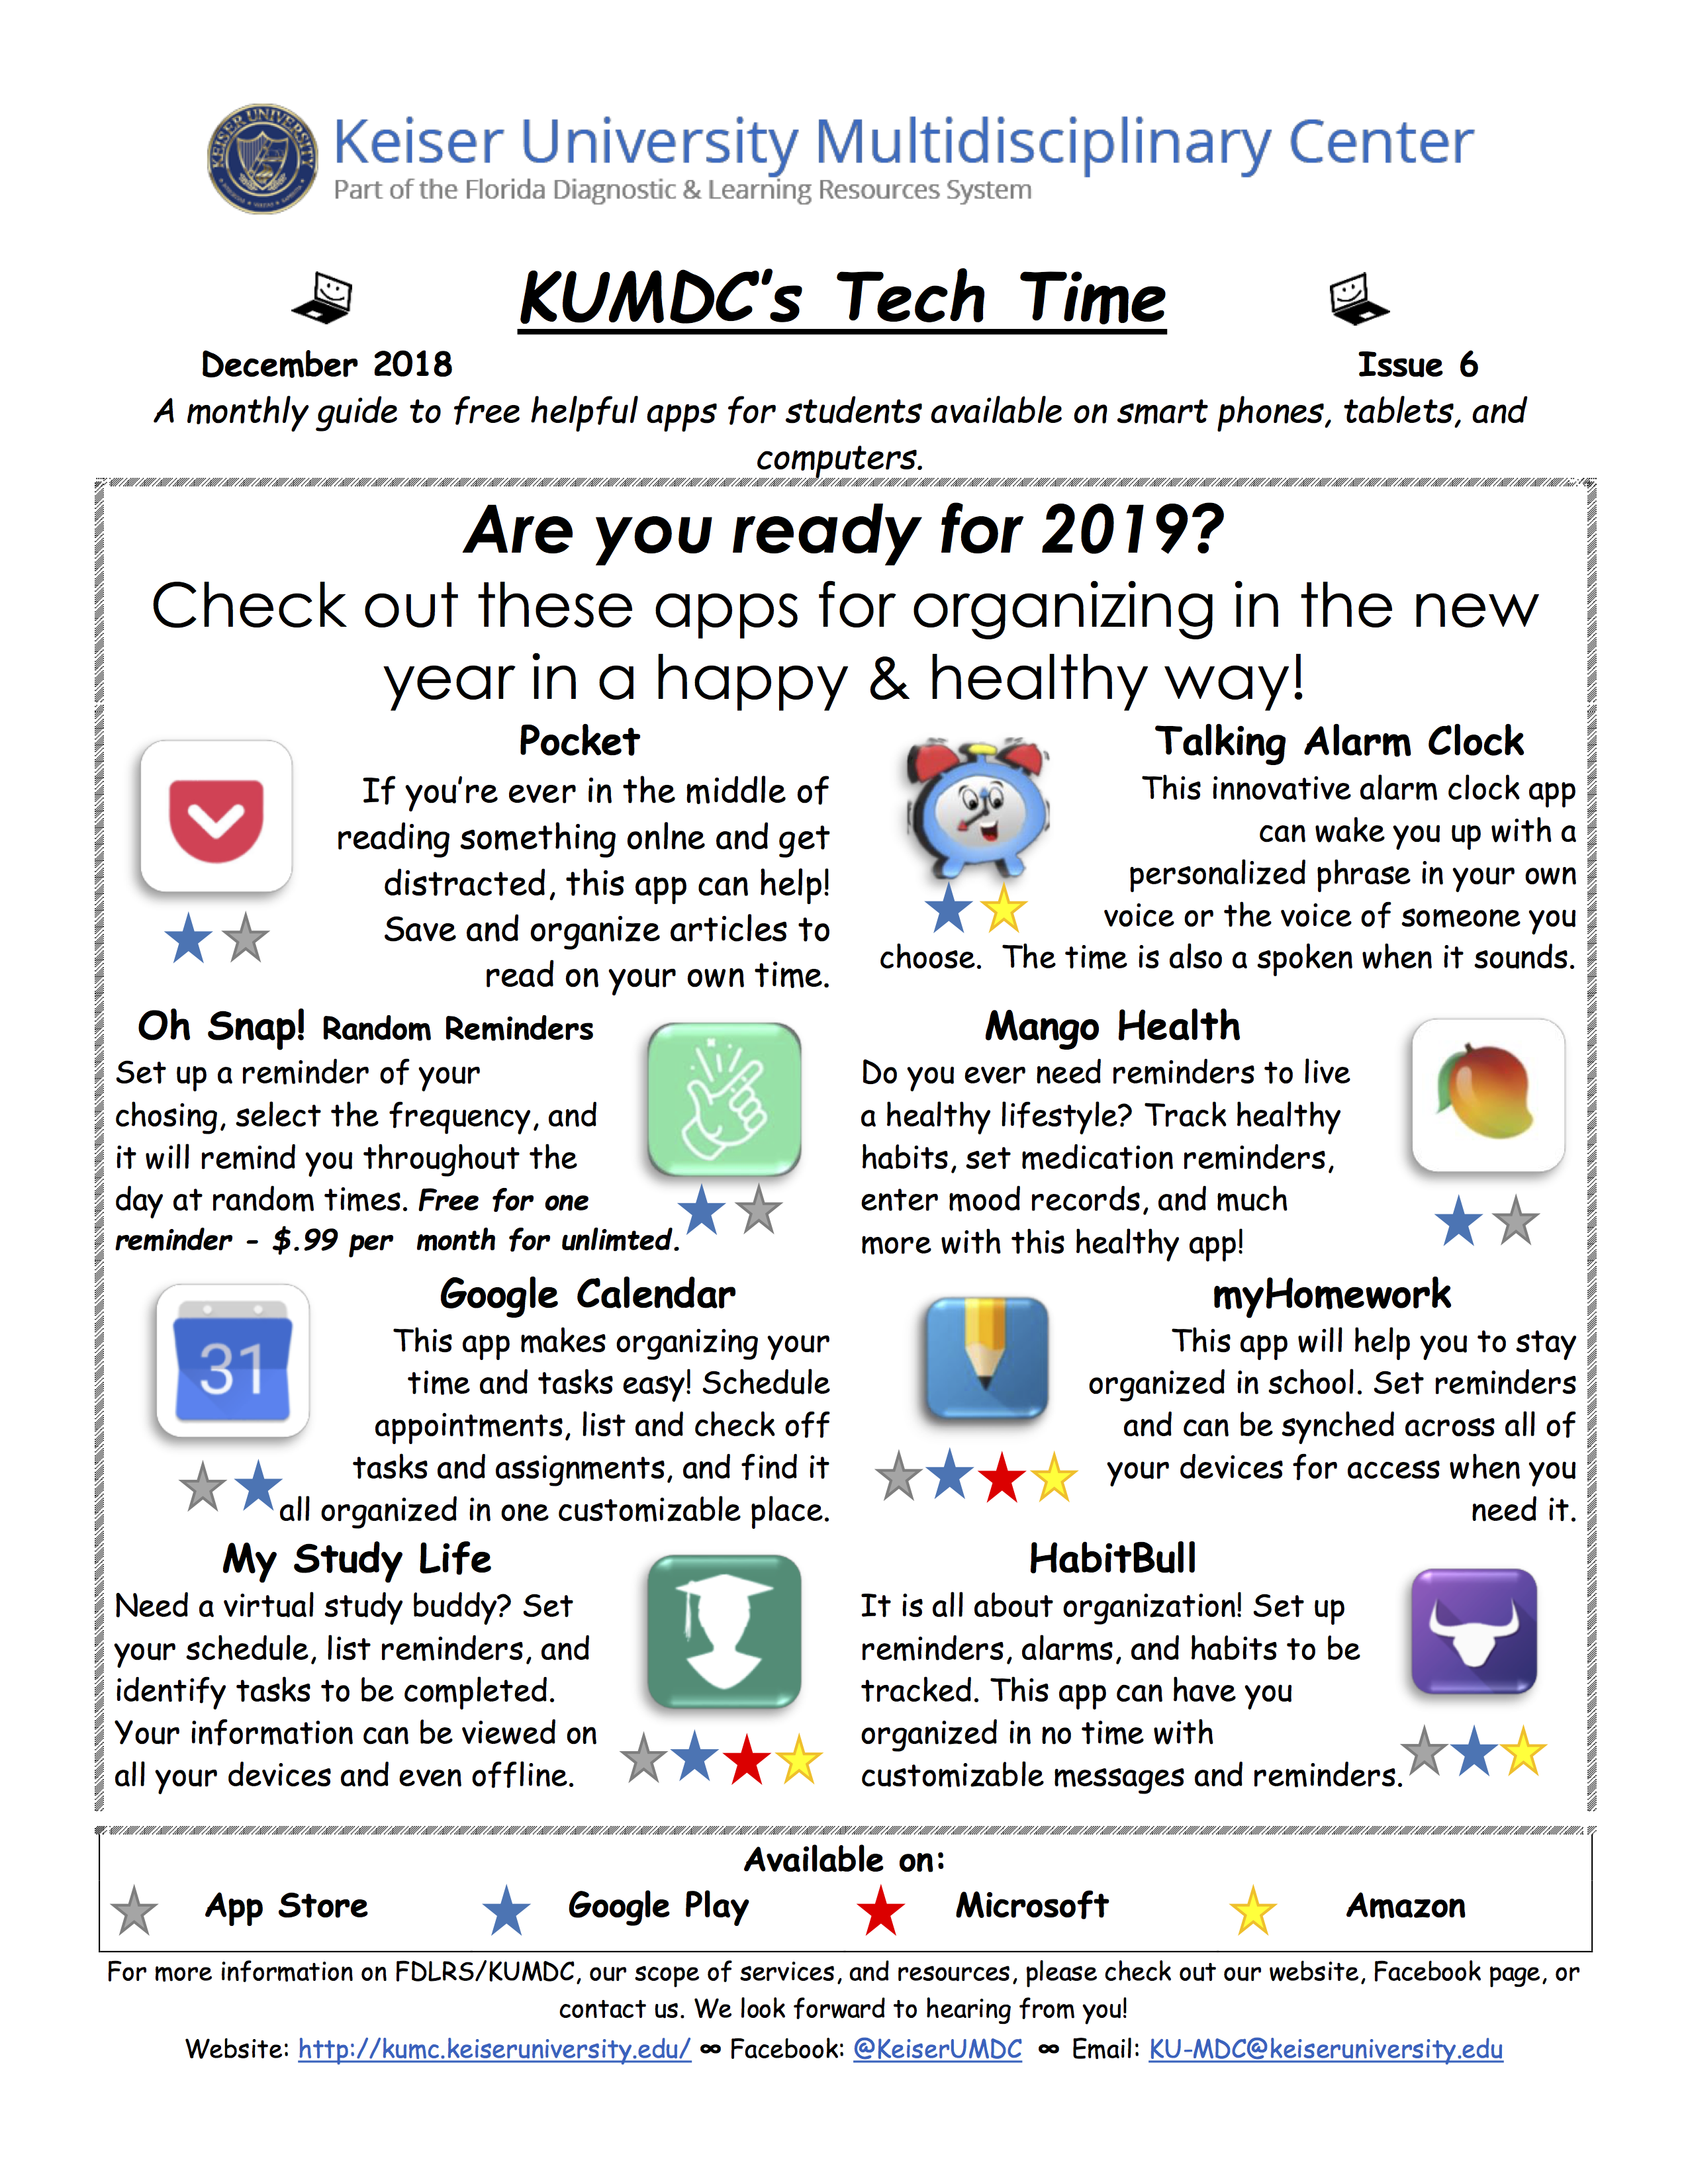 image with clickable link to December 2018 TechTime Newsletter